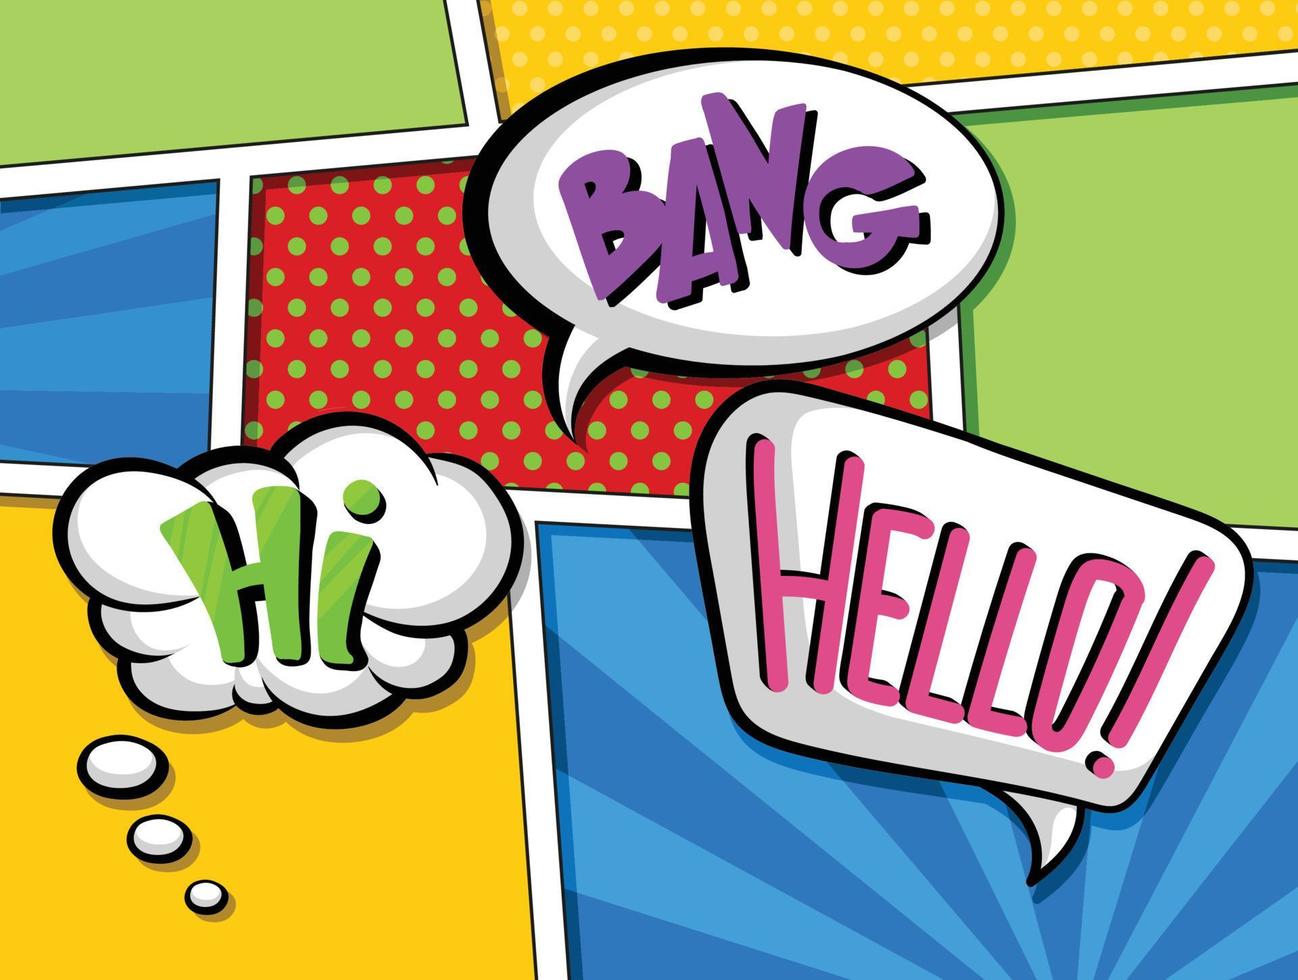 Comic speech bubbles with text set, colorful cartoon sound effects vector Illustrations, pop art style.